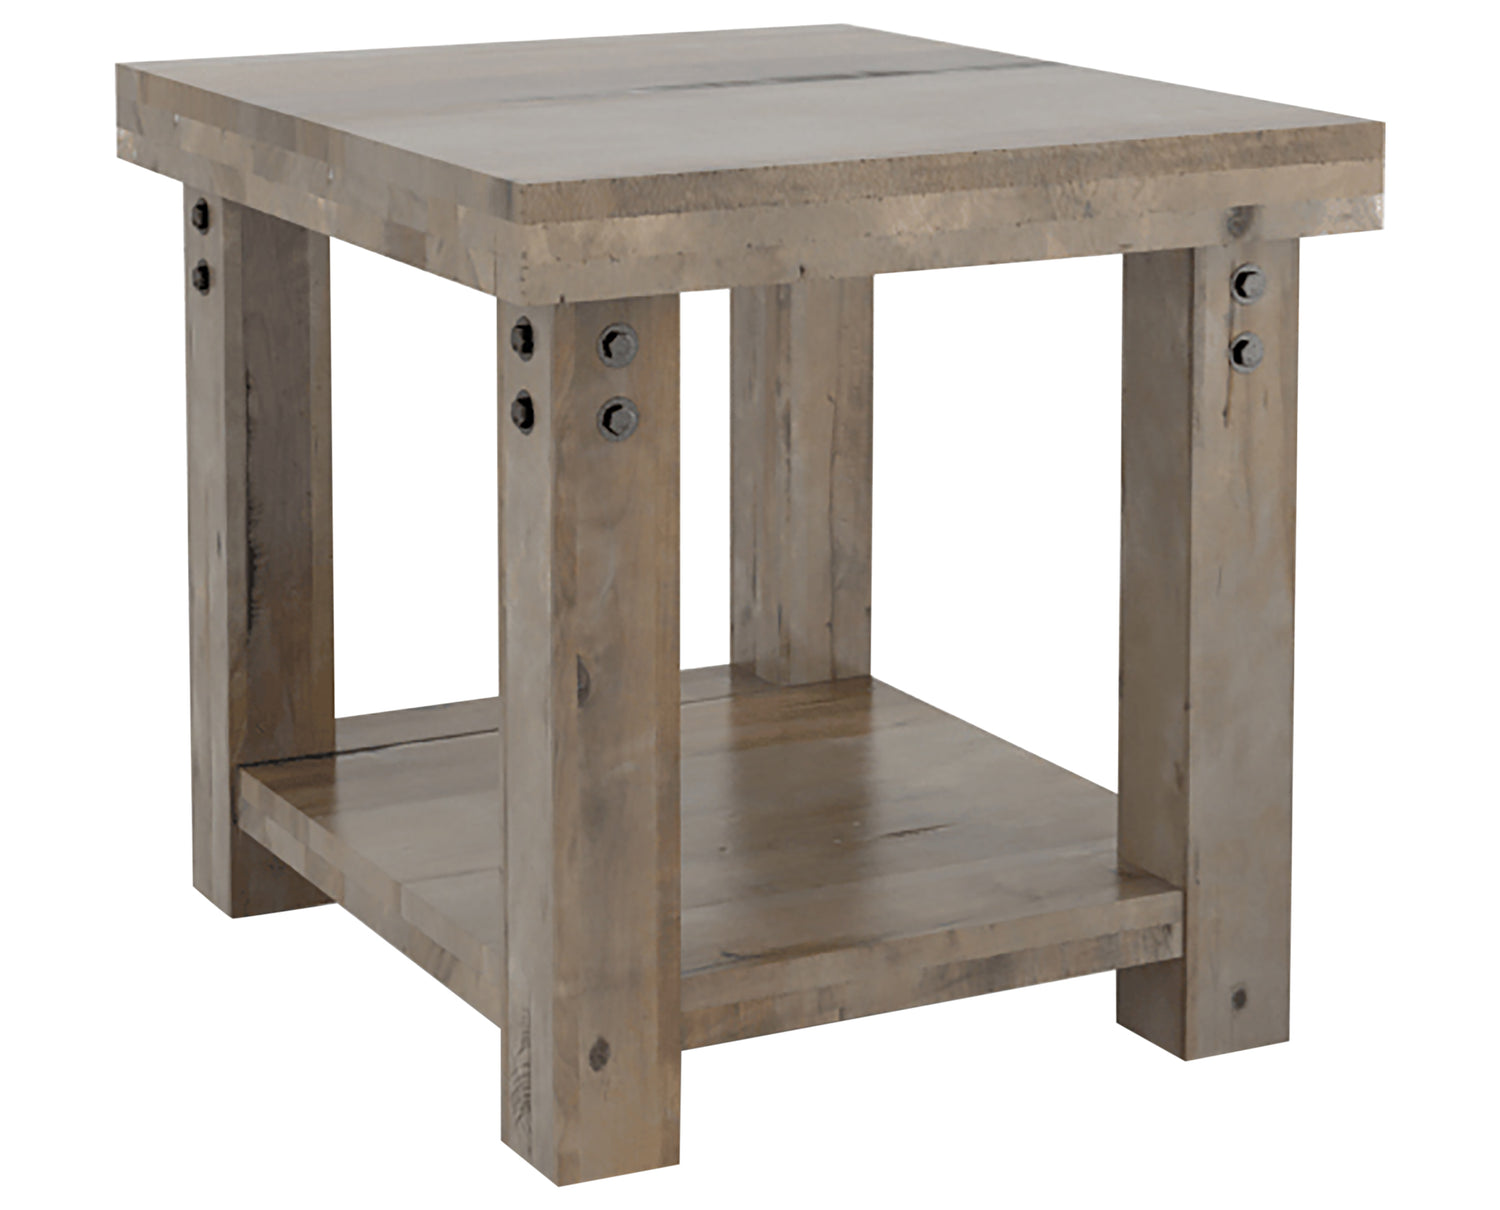 Shadow with HJ Legs | Canadel Loft End Table 2824 | Valley Ridge Furniture